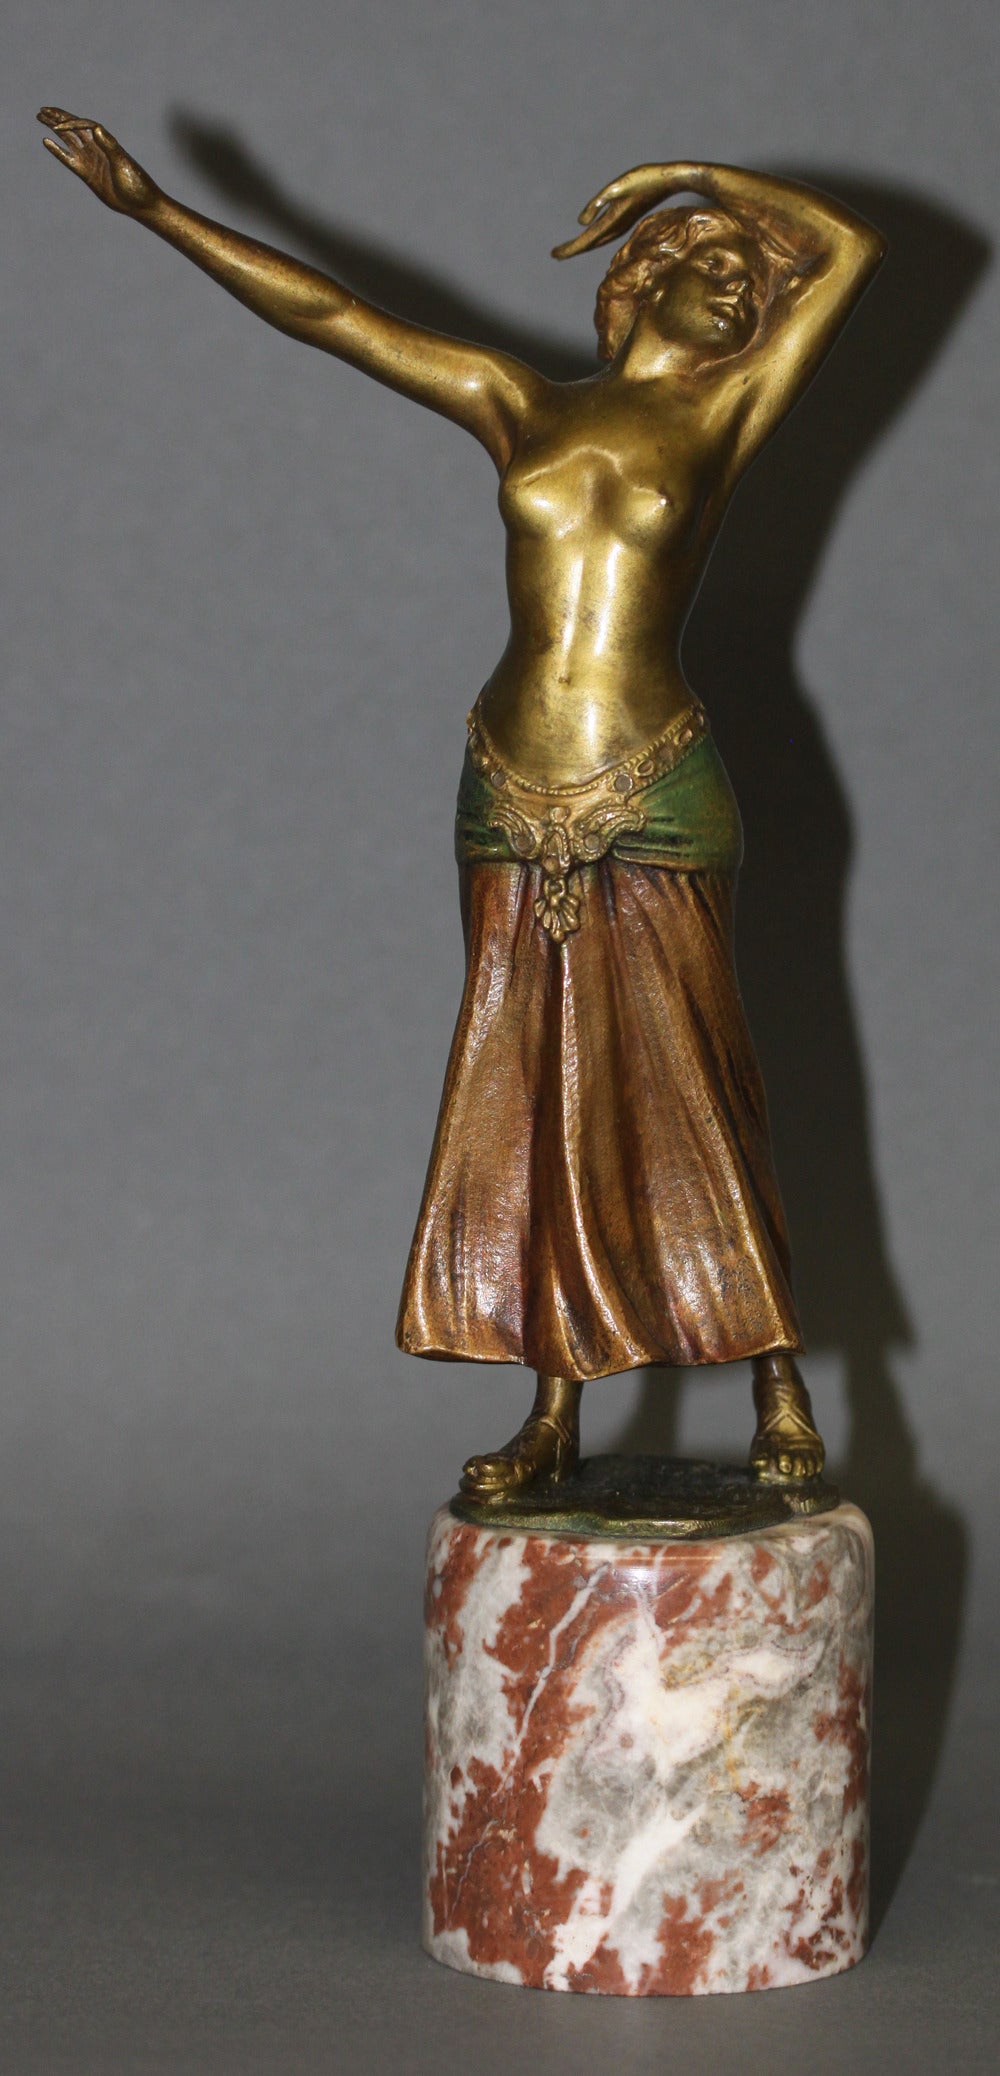 A cold painted Austrian bronze of semi nude dancer on a marble base. 

Signed Fitz, made in Austria.

Austria, circa 1910.

Excellent condition.

Dimensions: Height: 8